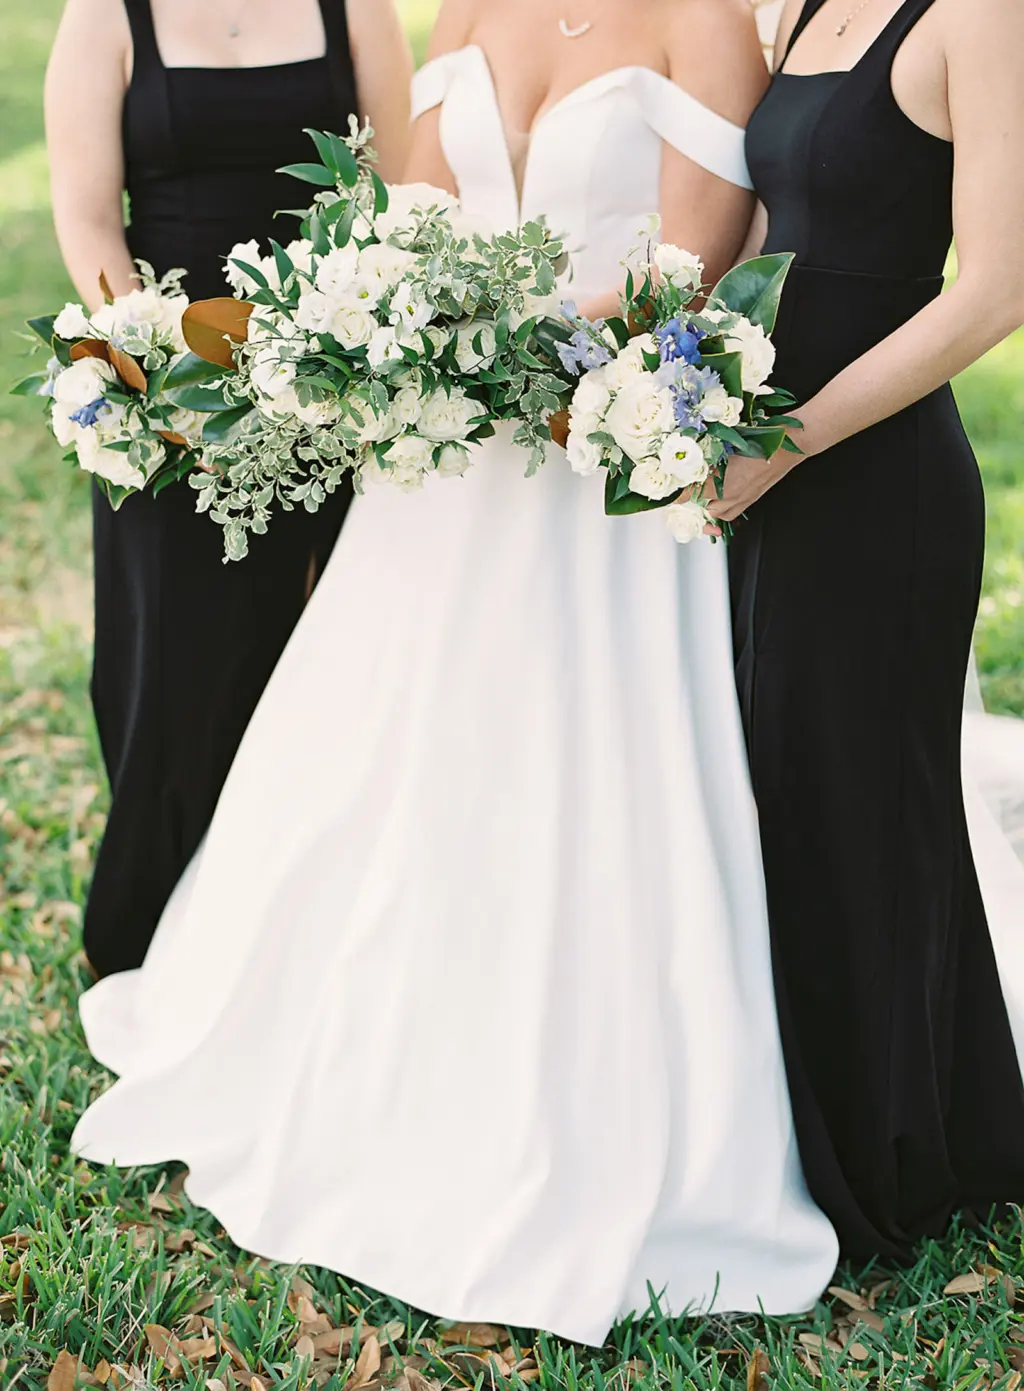 White Roses, Blue Stock Flowers, and Greenery for Classic Wedding Bouquets Ideas | Tampa Bay Florist Save The Date Florida